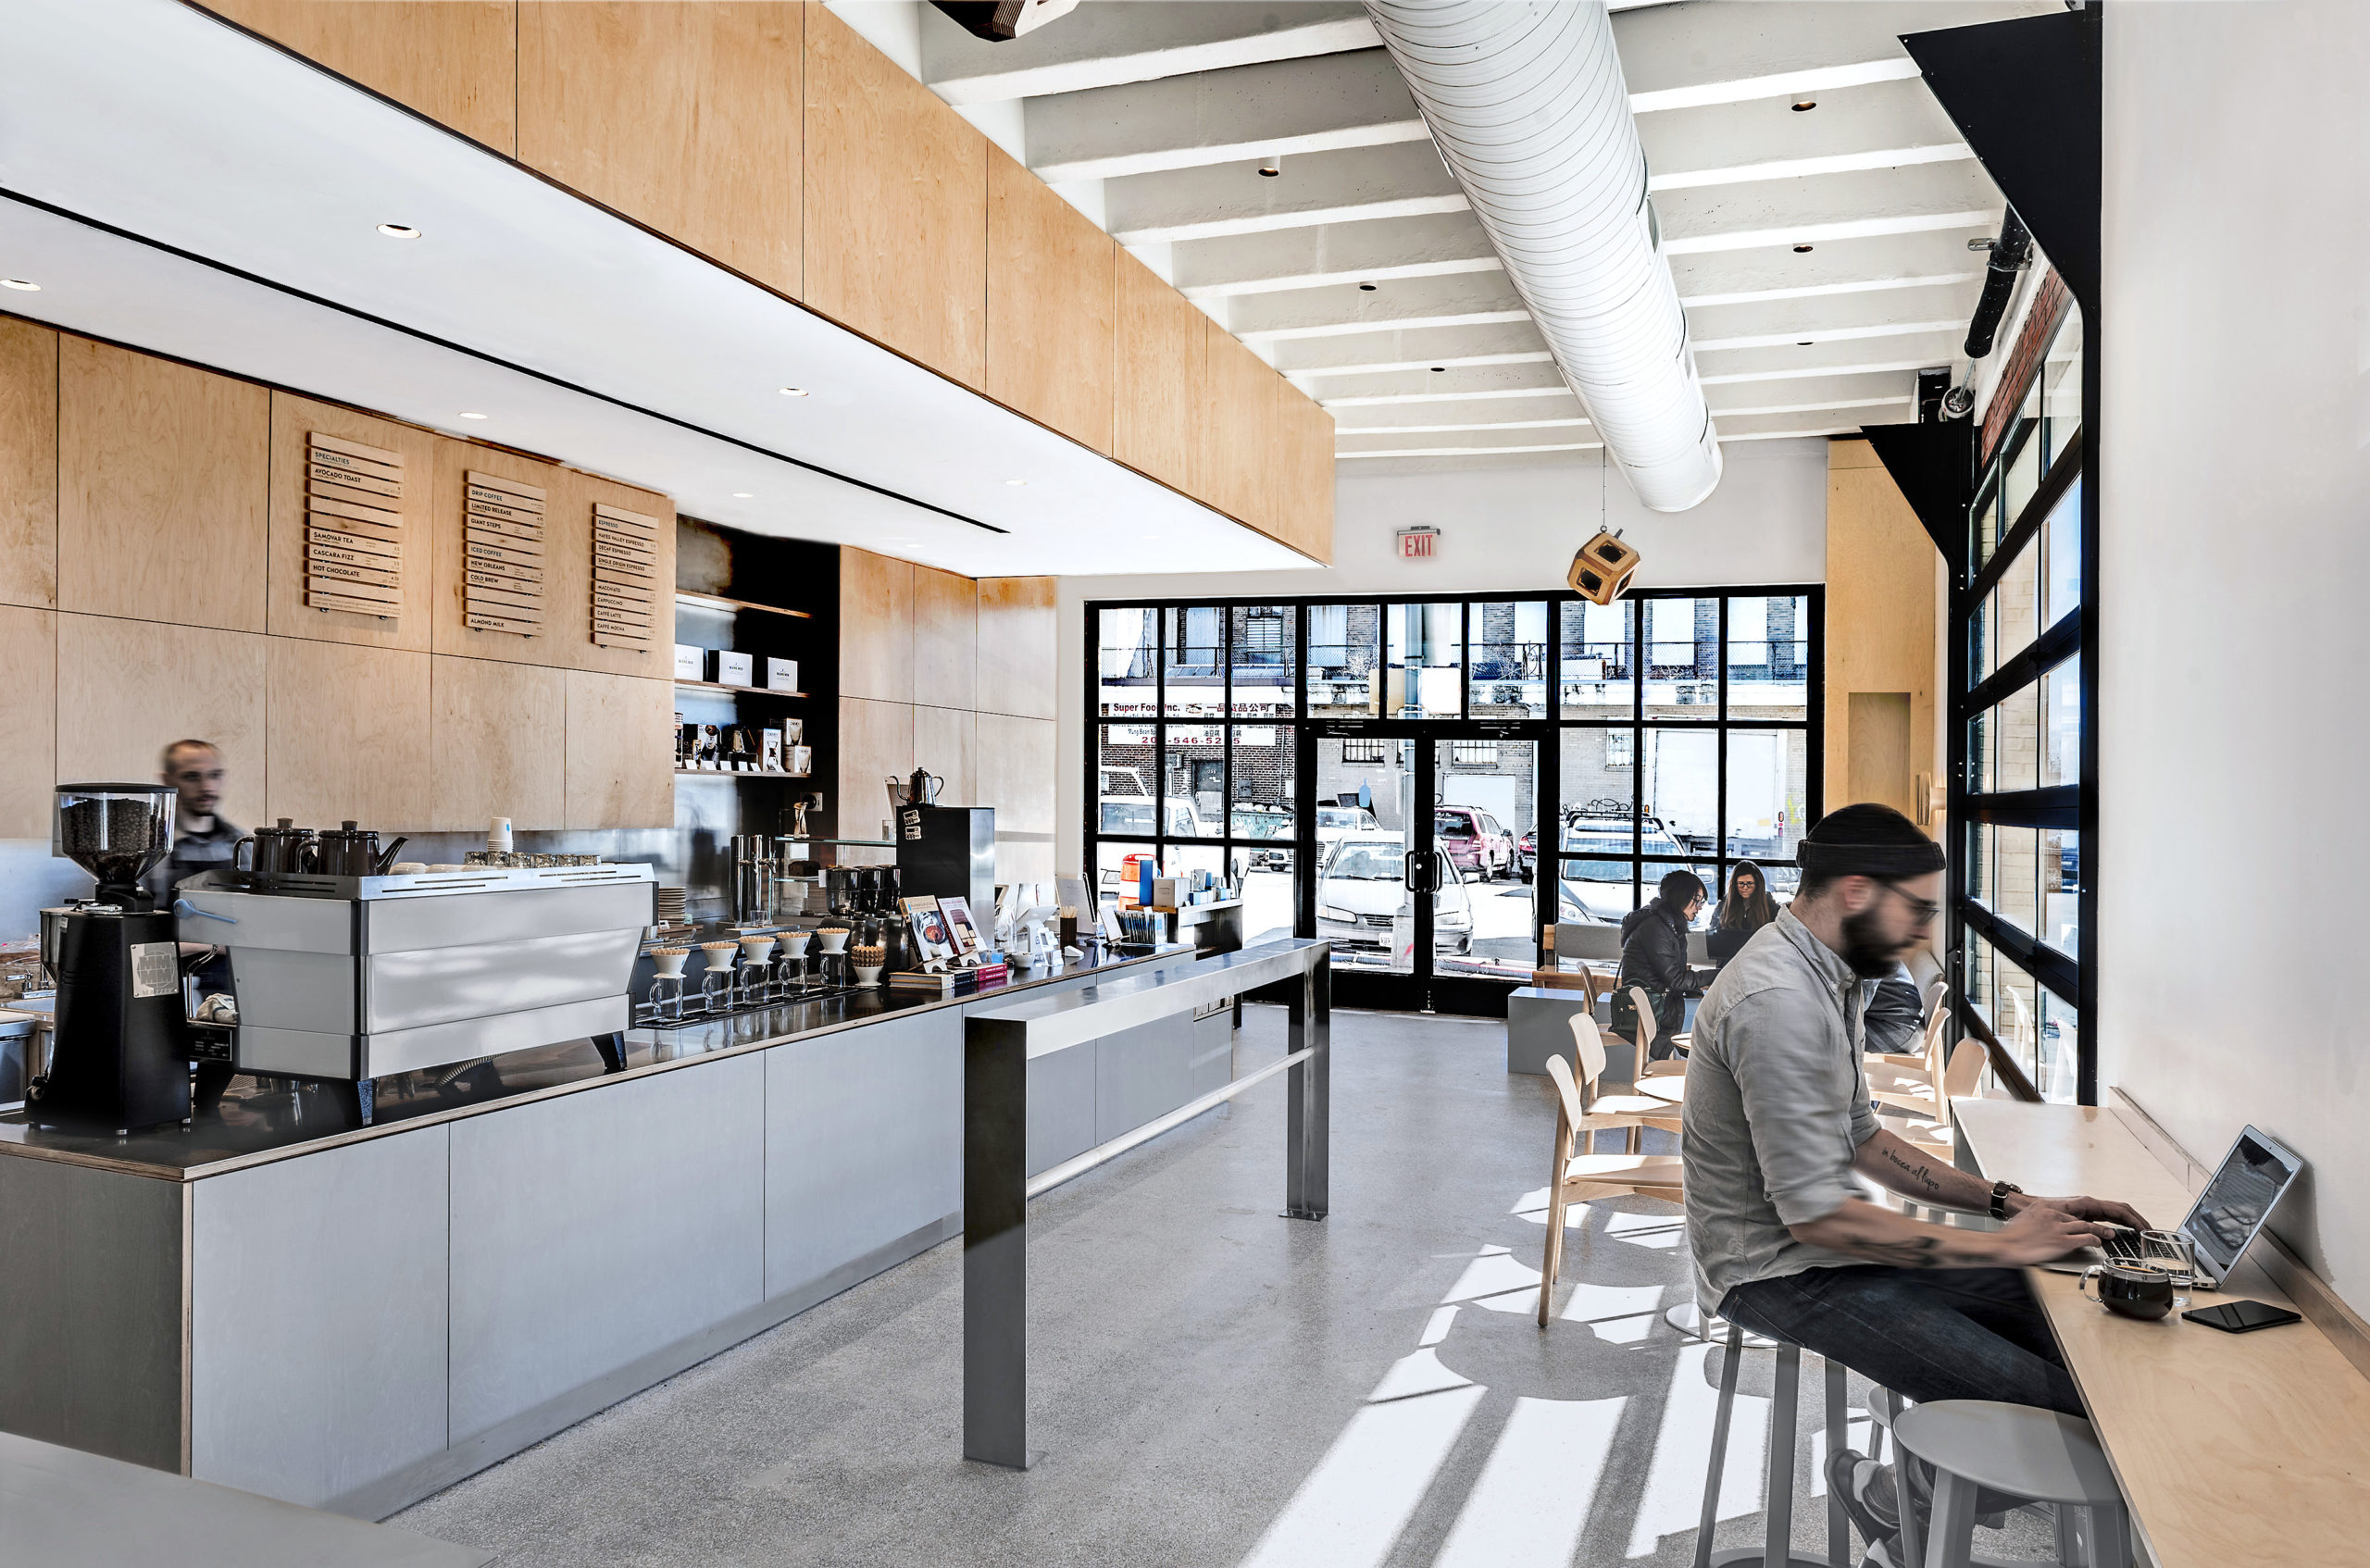 Blue Bottle Coffee's New Union Market Cafe Opens March 4 - Eater DC